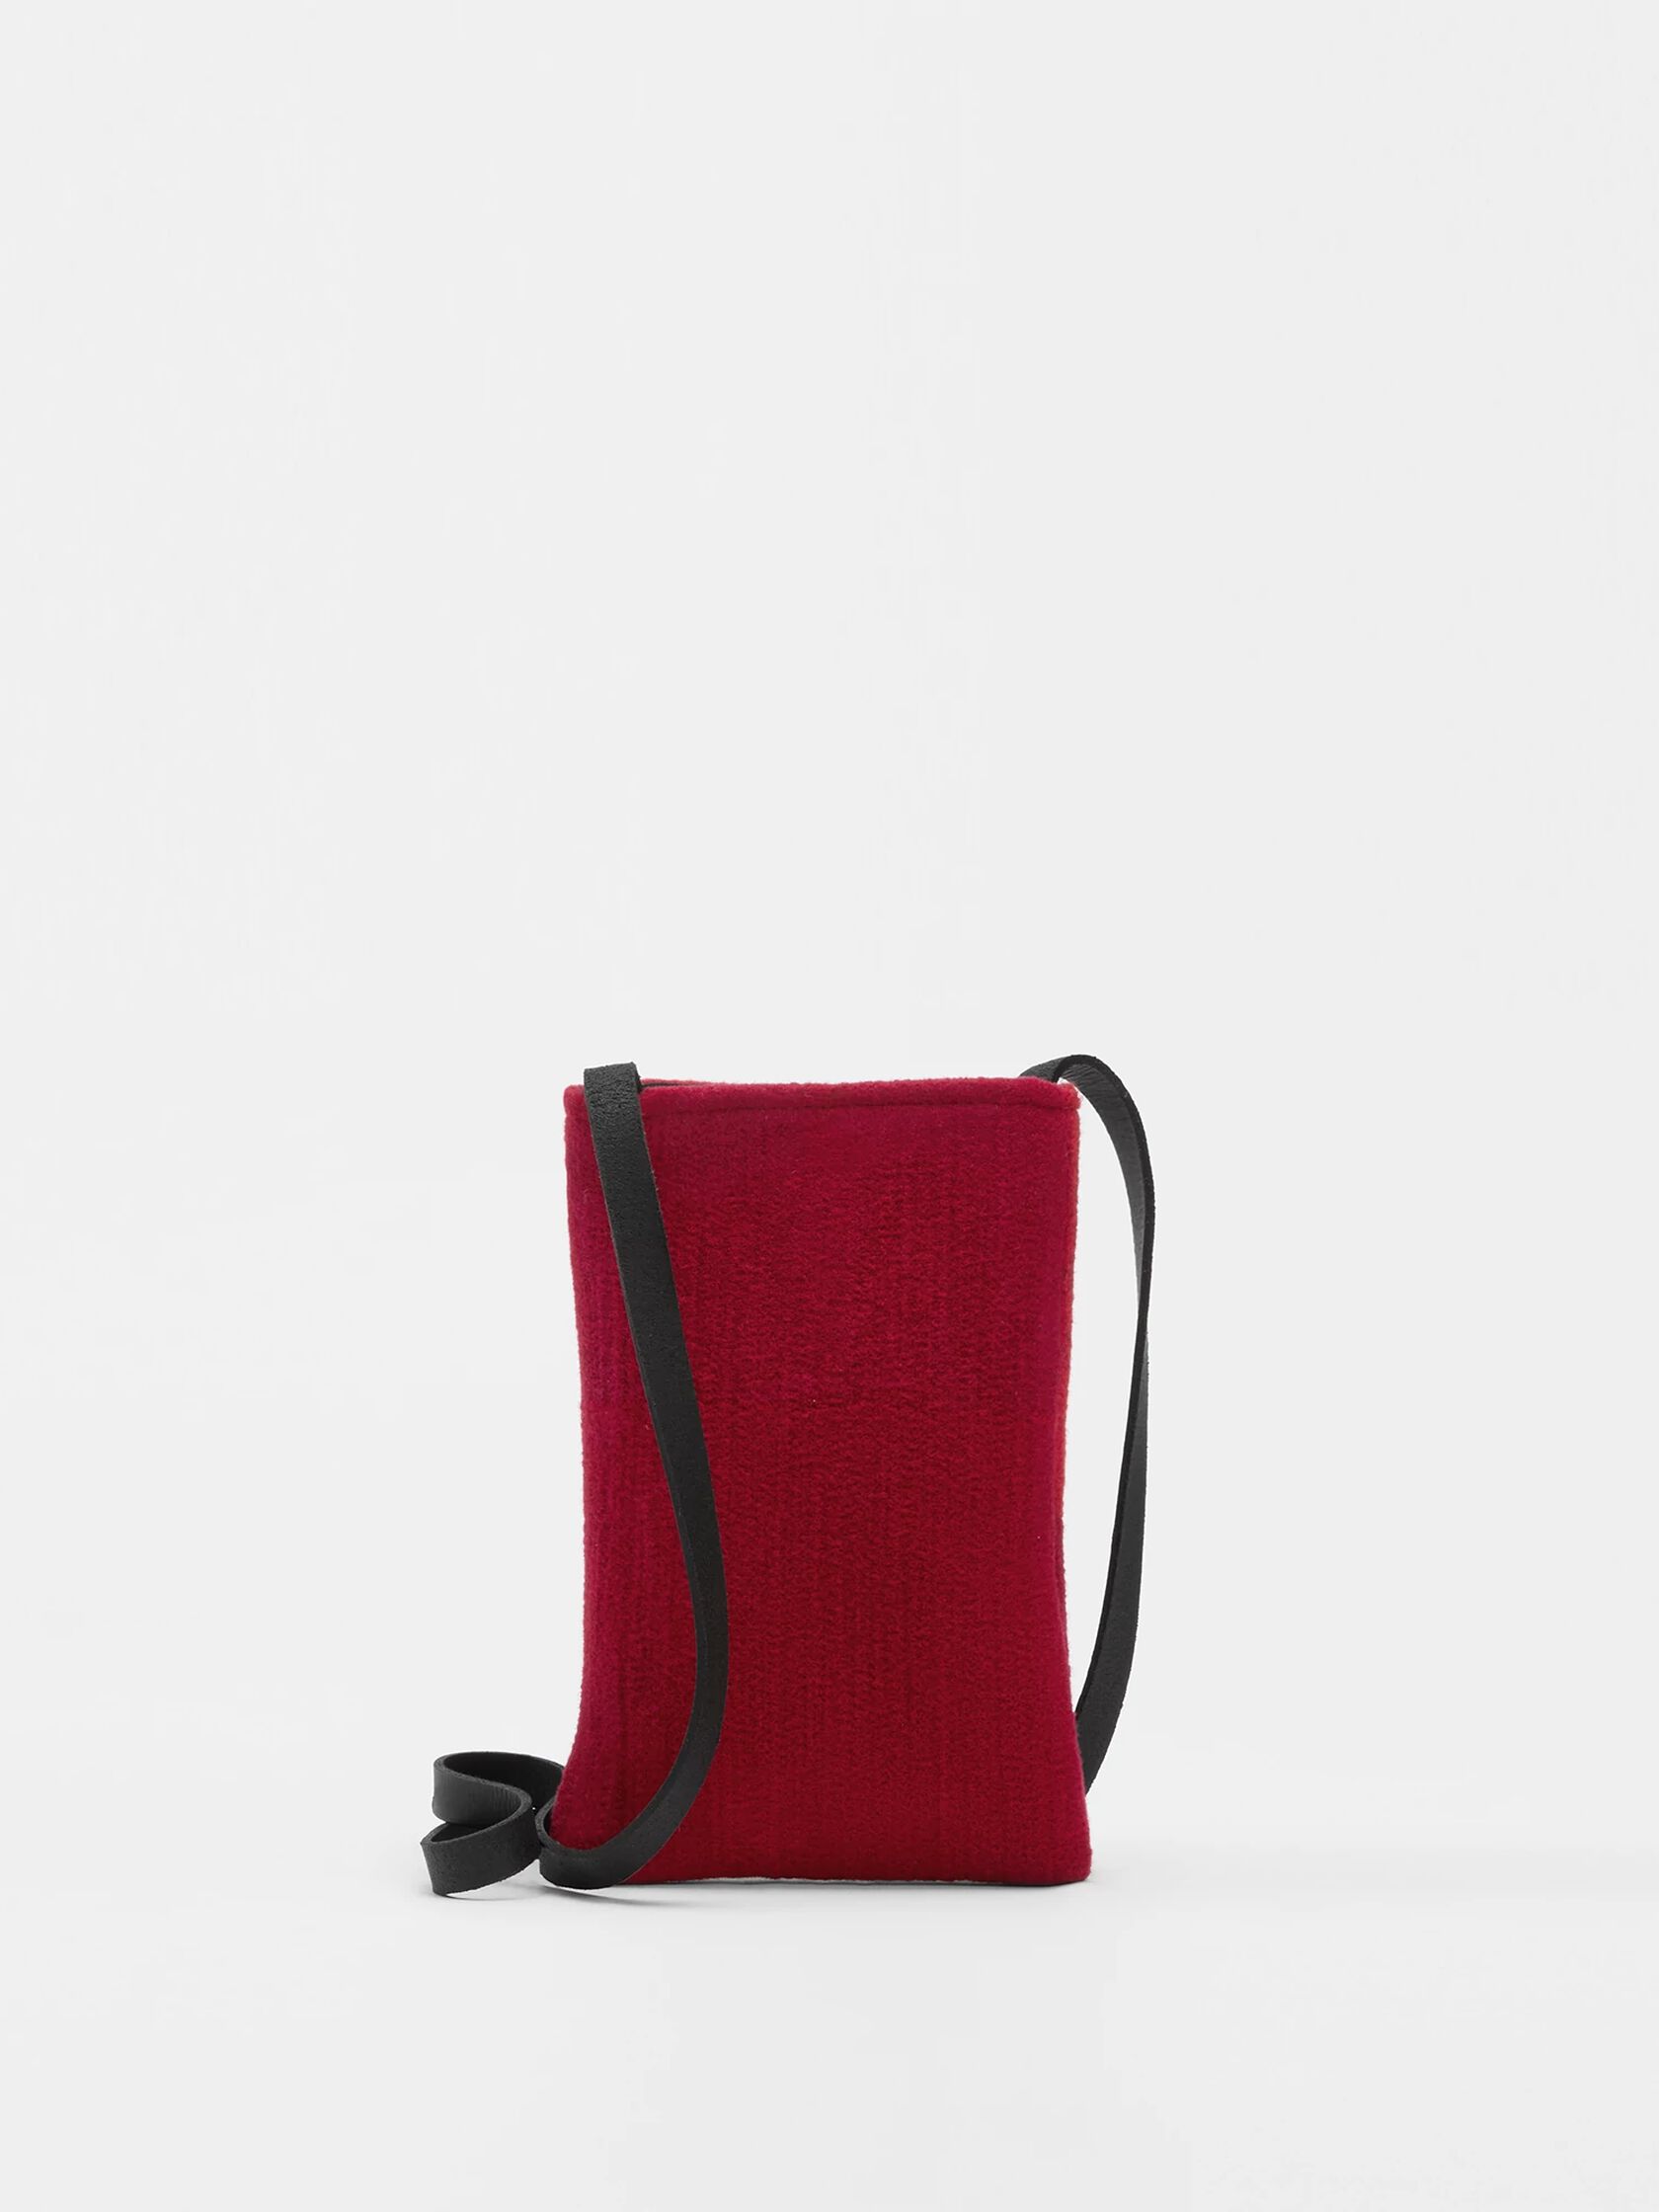 Waste No More Felted Phone Pouch